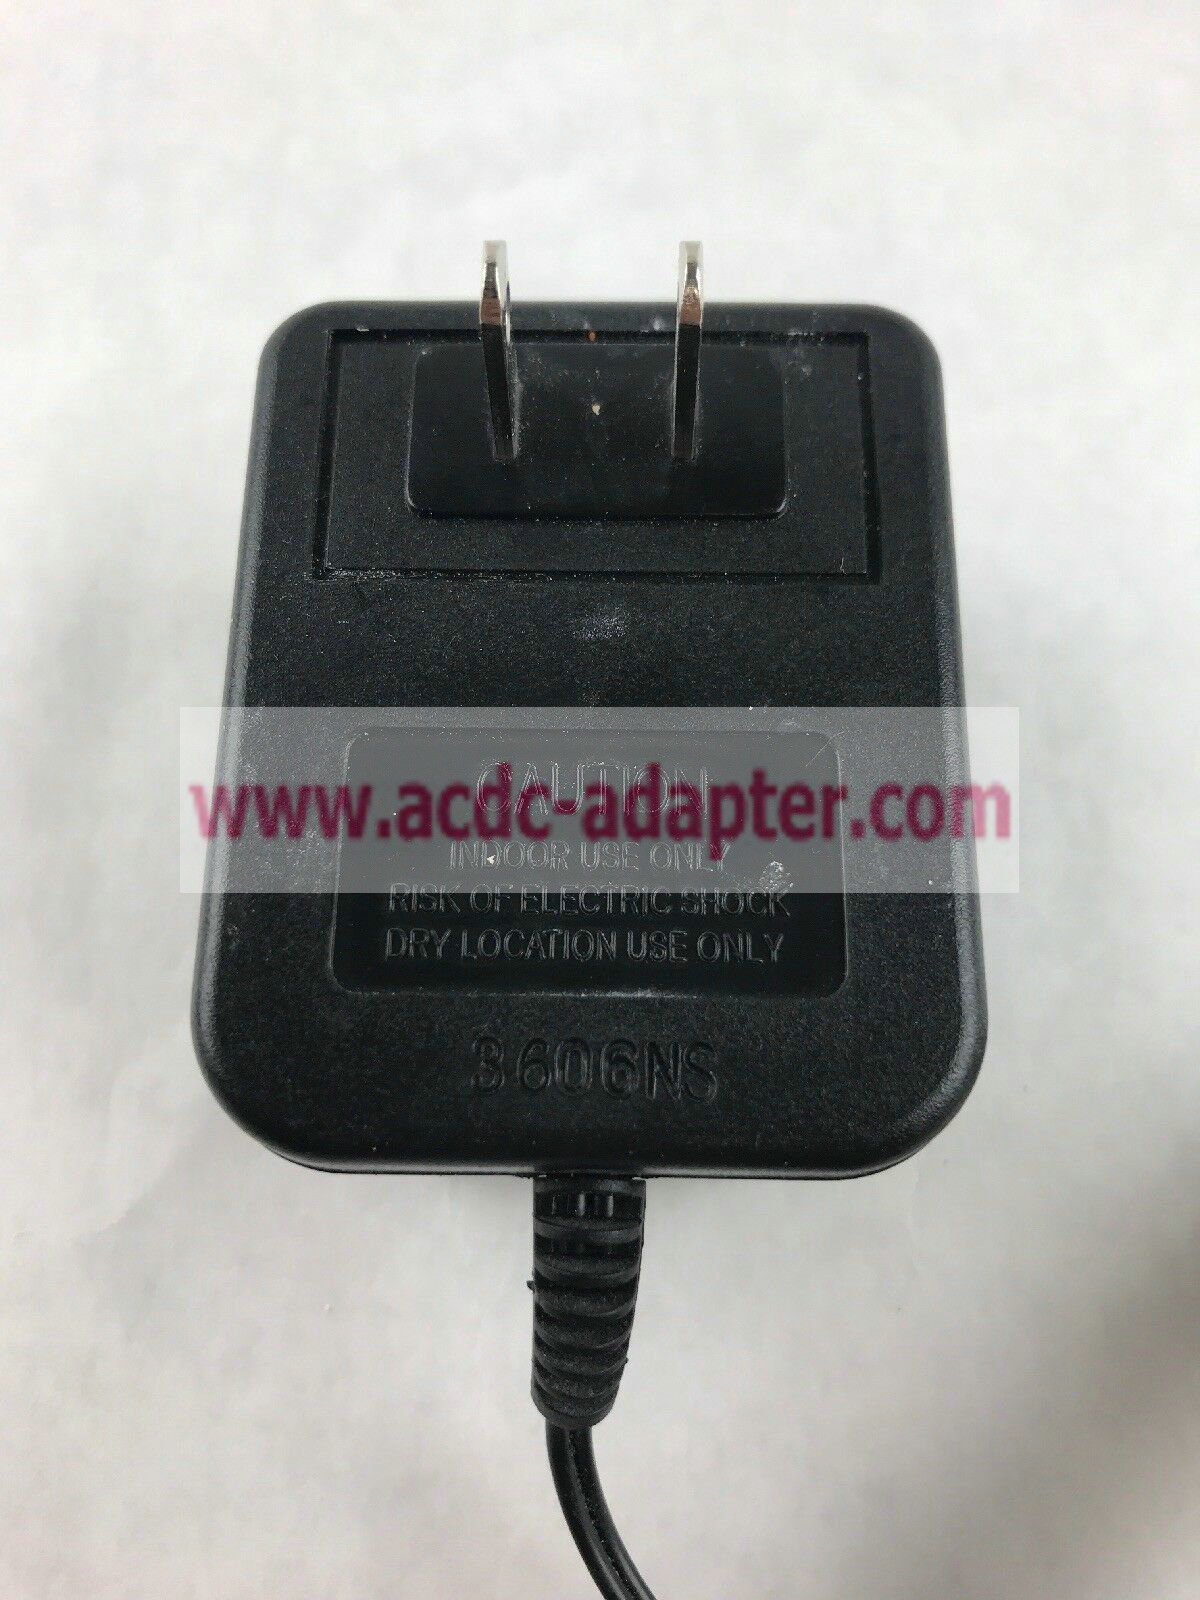 Uniden Model AD-830 9Volt 400mA Accessory AC Wall Power Supply Adapter